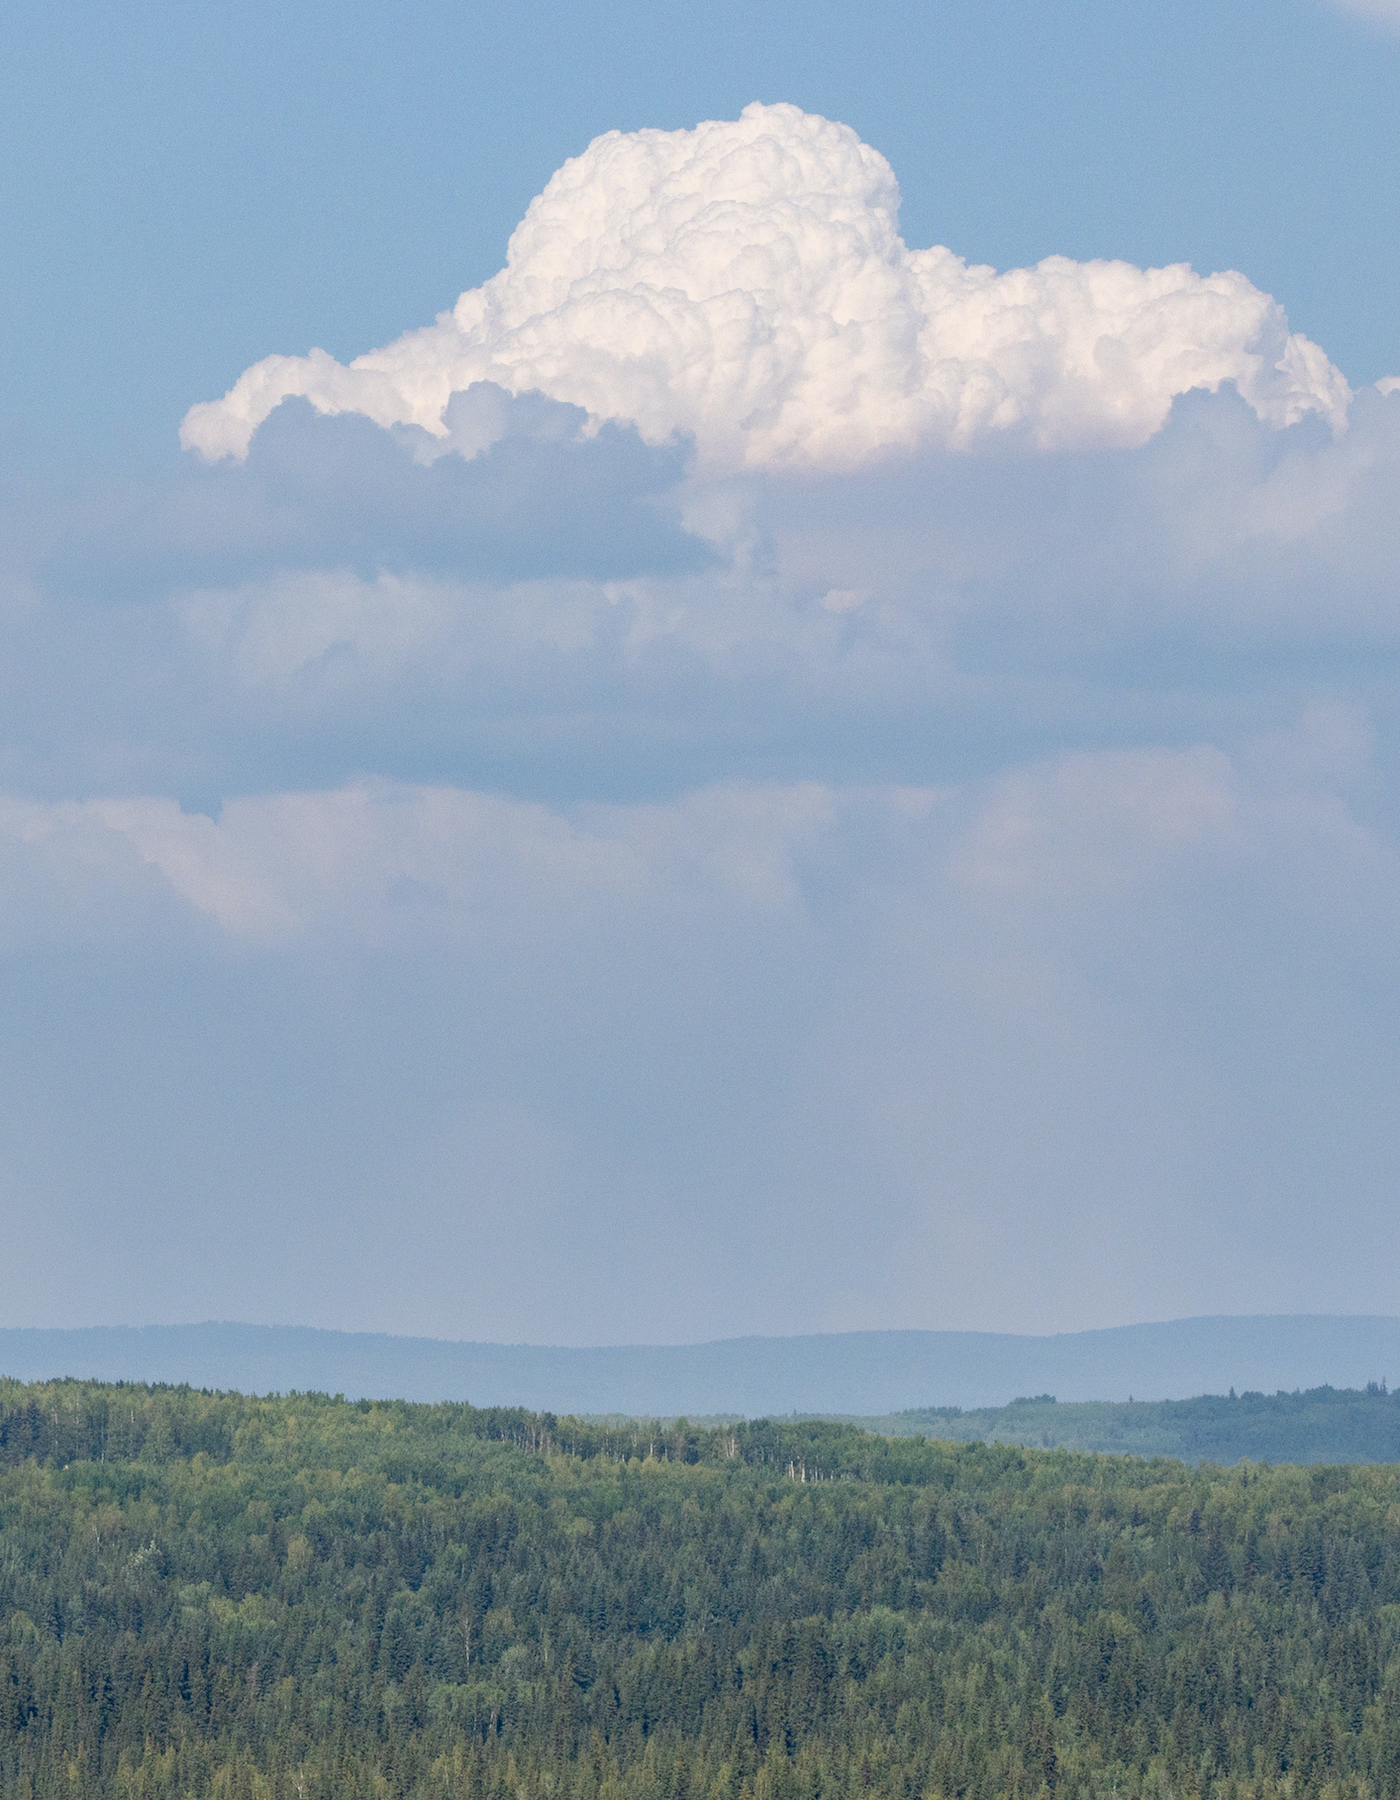 A white cumulus cloud rises above smoke and green hills.